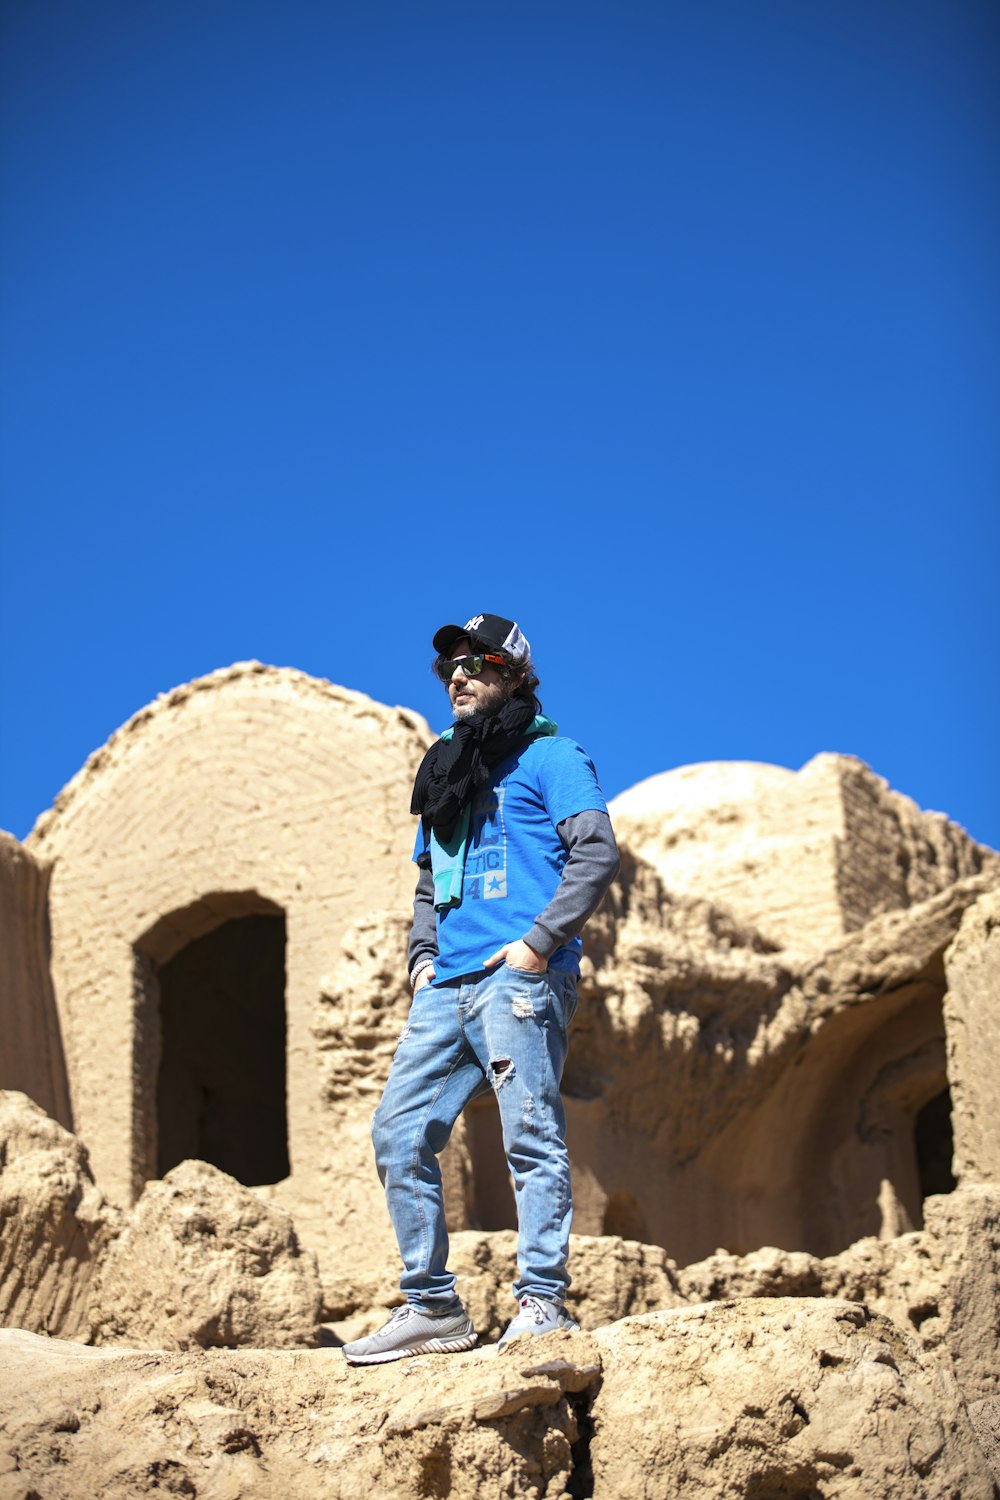 man in blue jacket and gray pants standing on brown rock formation during daytime